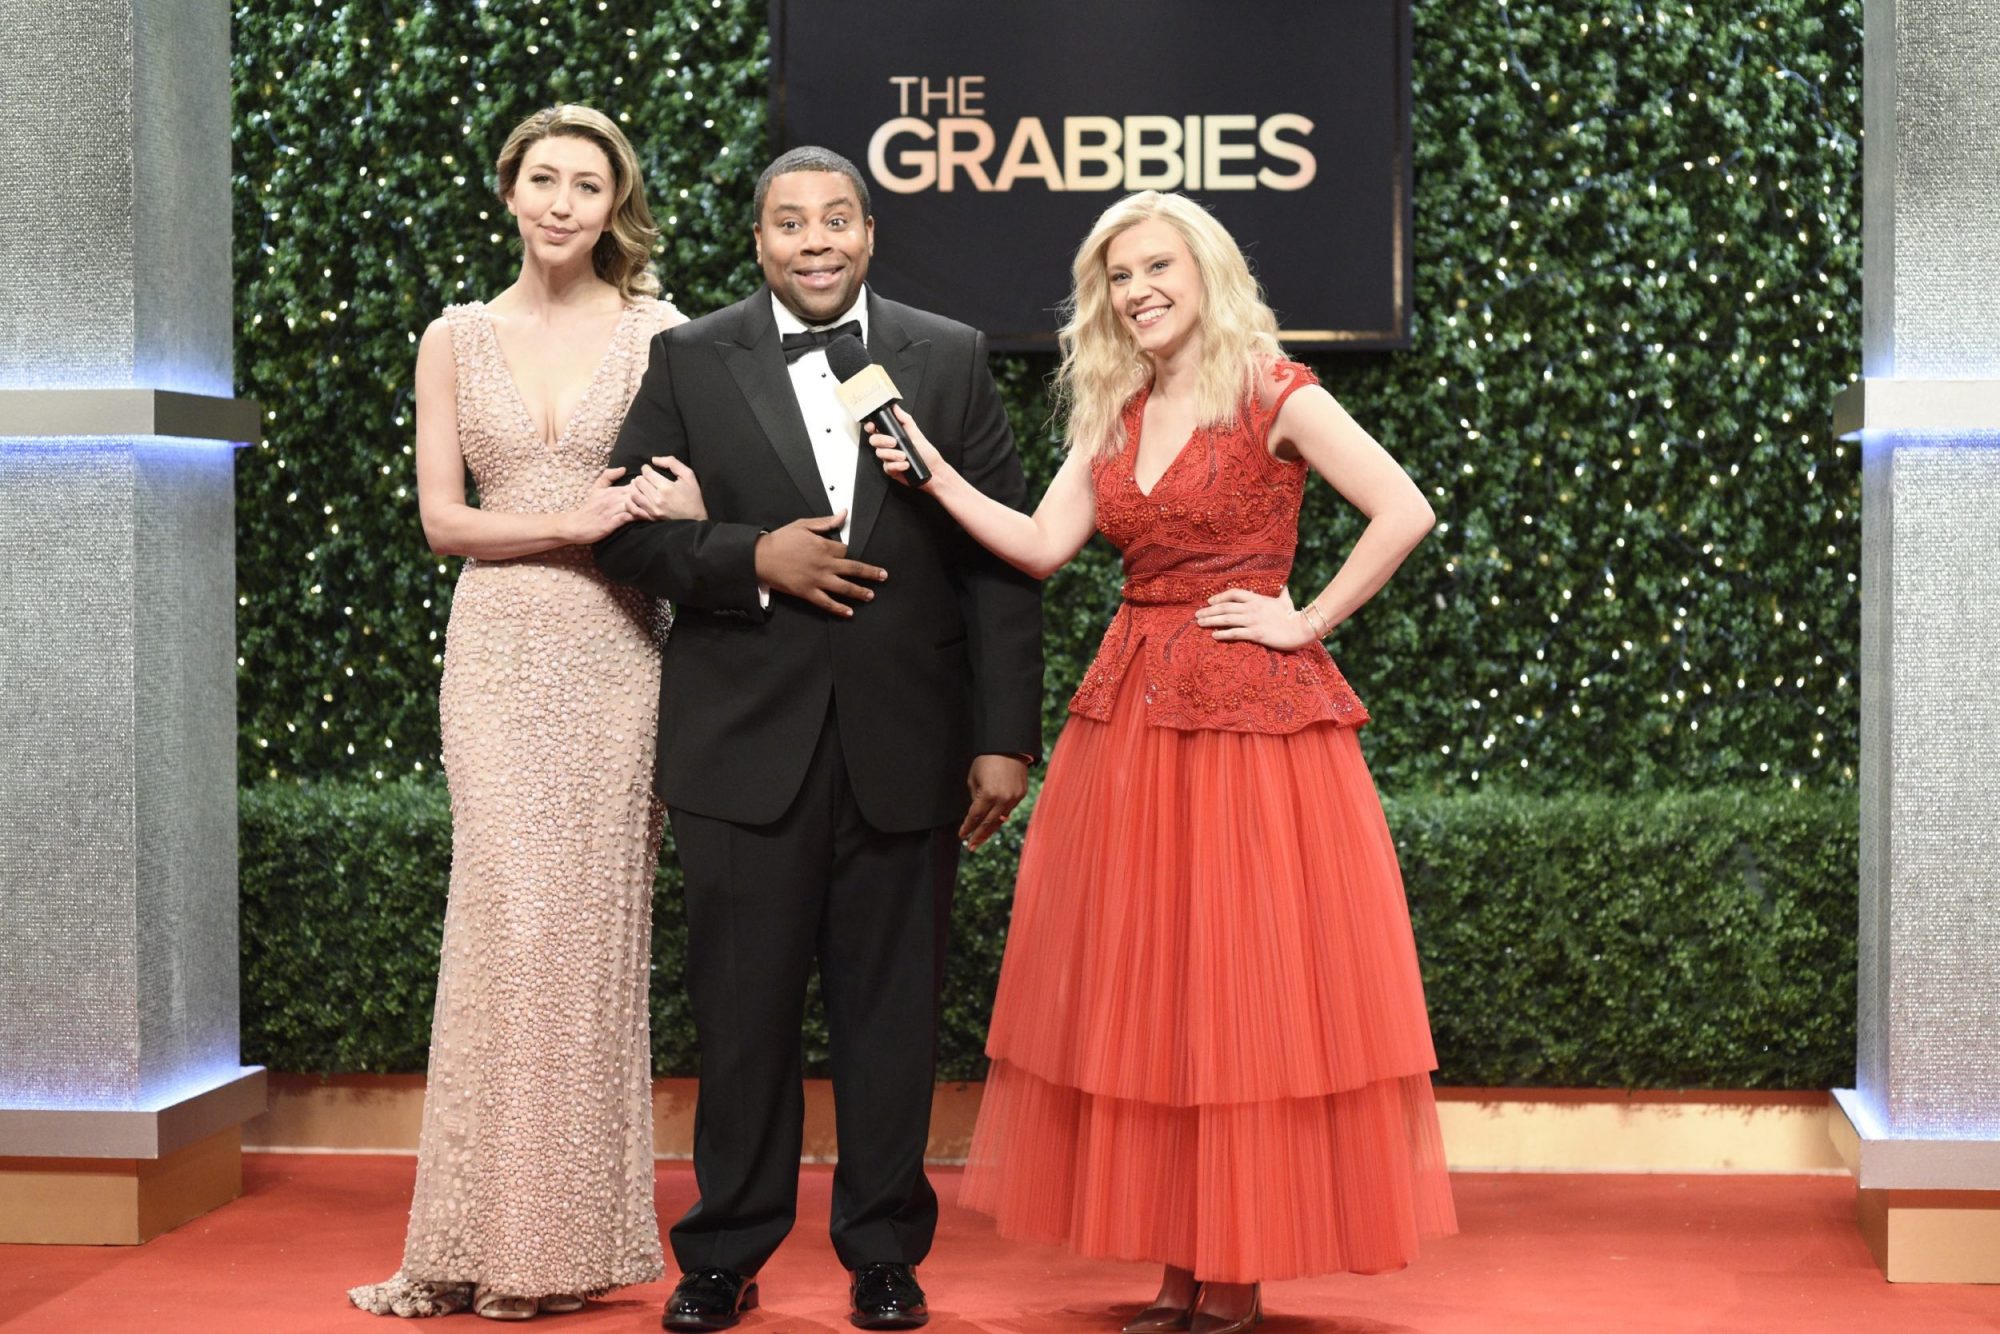 Photo of "Saturday Night Live" Cast Members Presenting The Grabbies